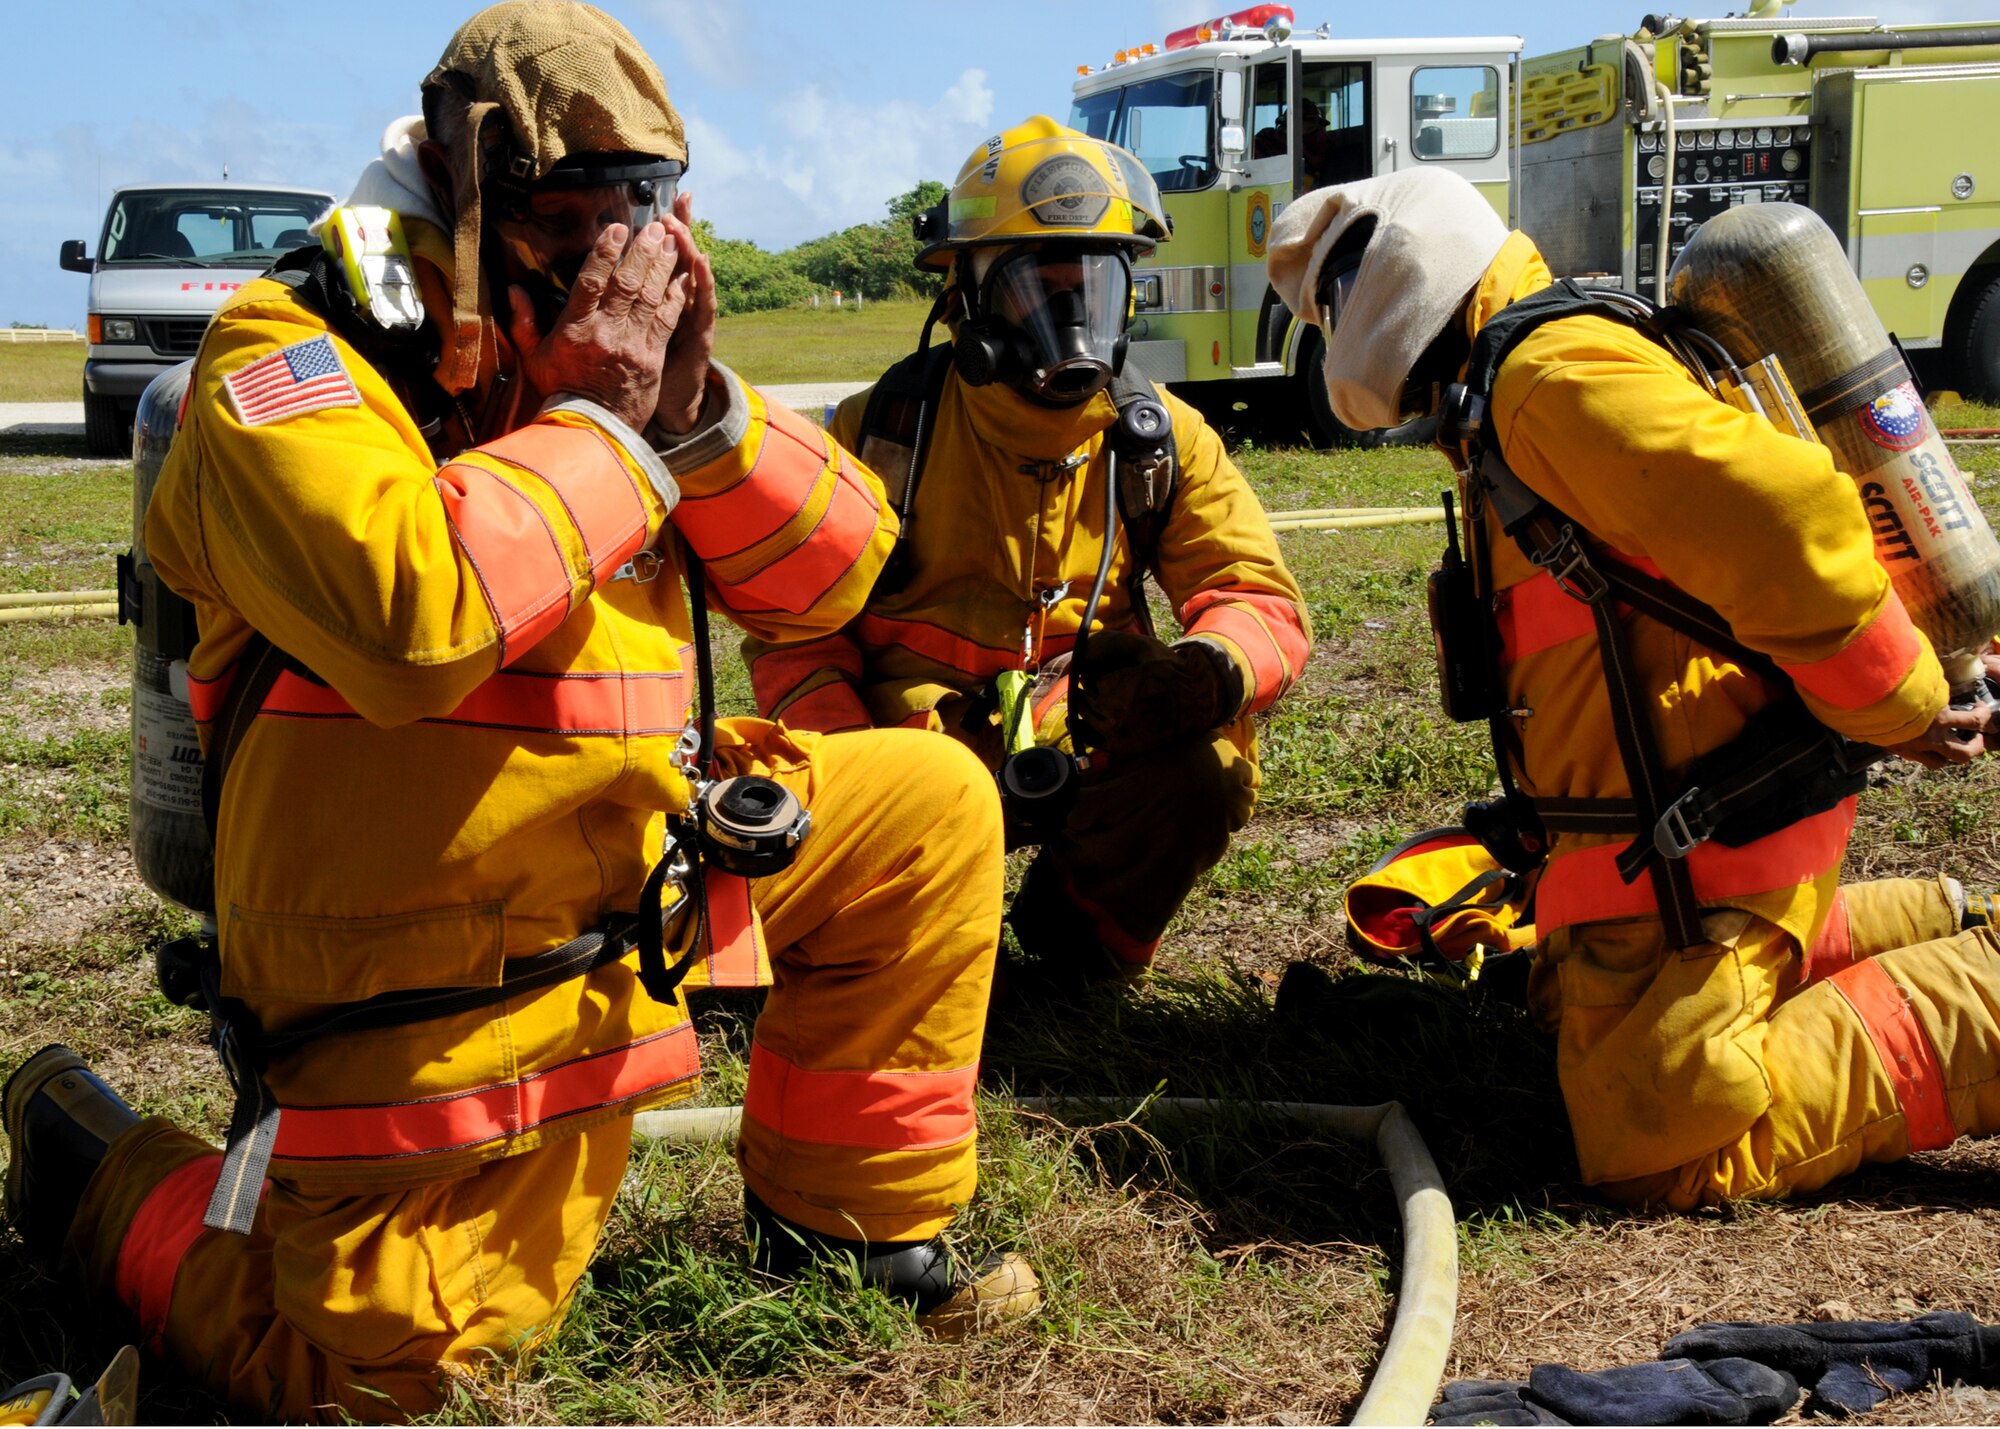 ANDERSEN AIR FORCE BASE, Guam - U.S. Navy firemen from Naval Base Guam suite up before entering a training scenario here Nov. 22. The Navy firemen used Andersen's live-fire training facilities to obtain Fireman 1 and Fireman 2 certifications. Andersen is home to Guam's only live-fire simulation training structures. (U.S. Air Force photo by Senior Airman Nichelle Griffiths)